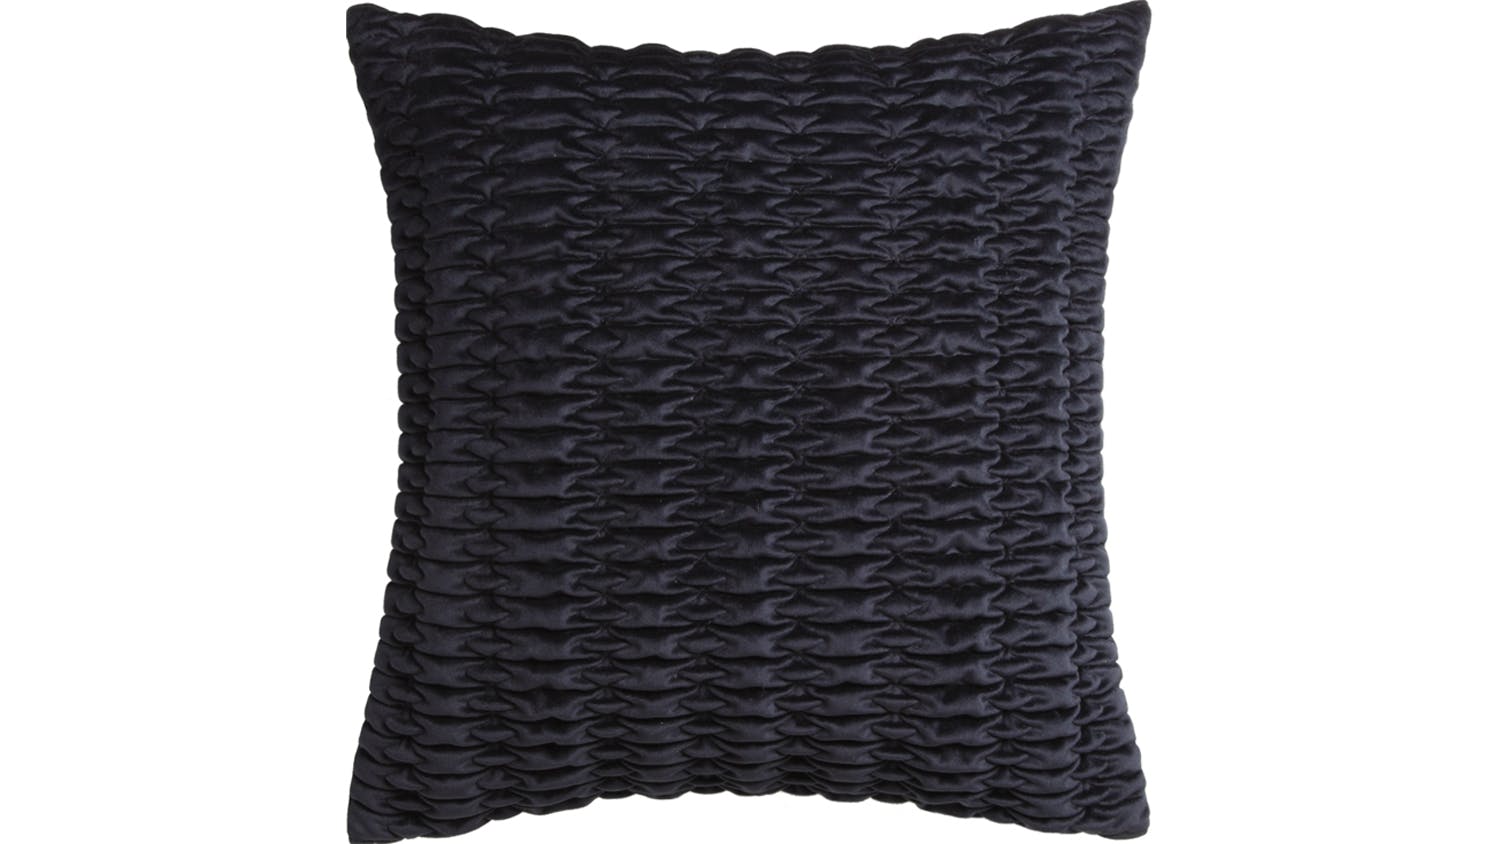 Loxton Square Cushion by Private Collection - Navy